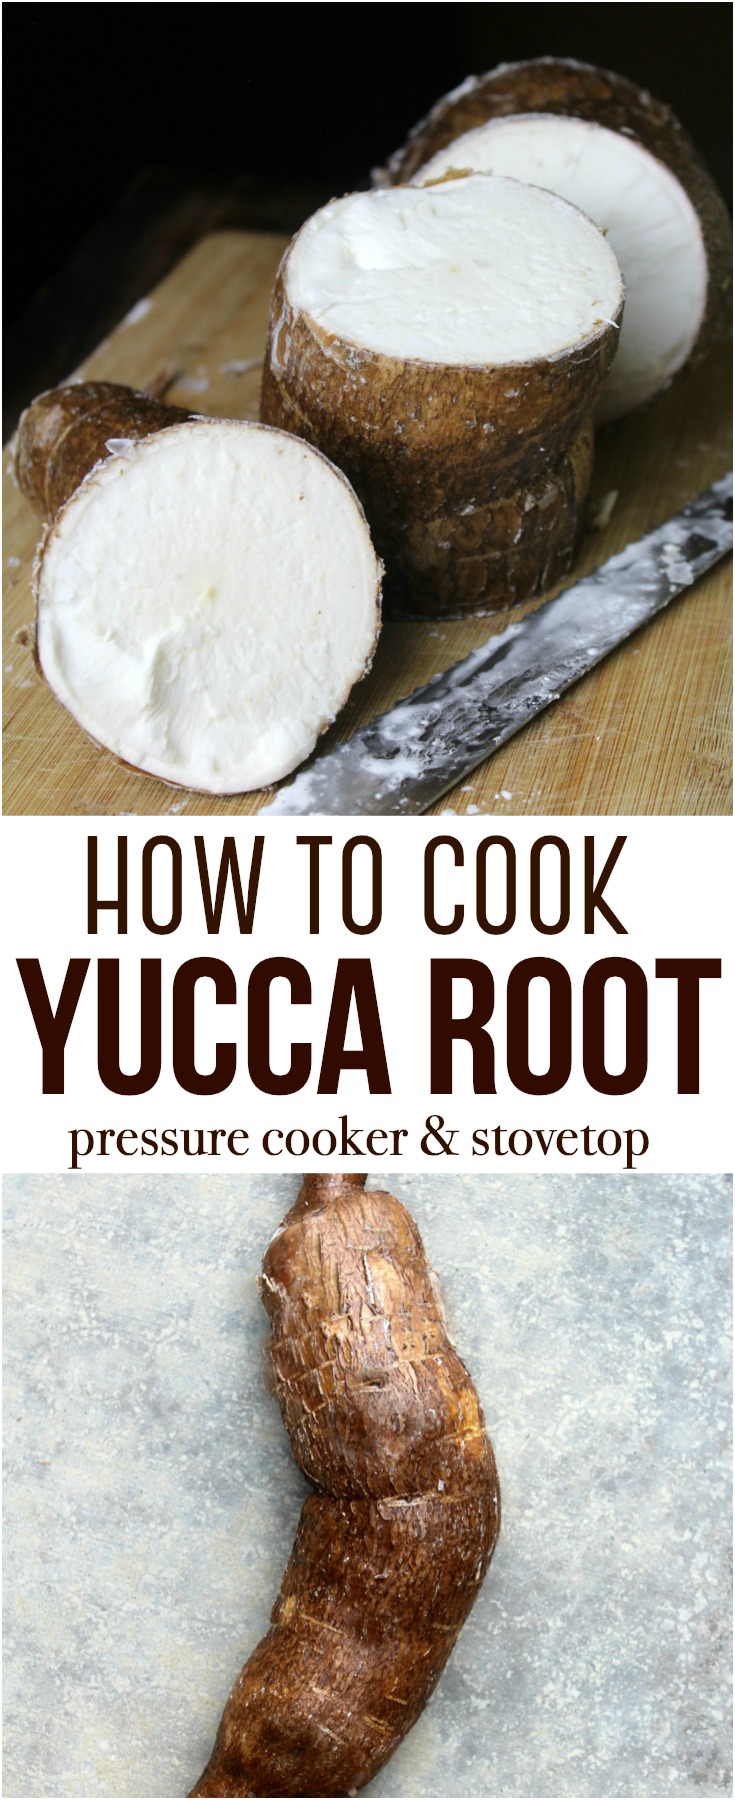 How to cook yucca root with easy step-by-step directions on peeling and prep for cooking via stovetop or pressure cooker.  #pressurecooker #stovetop #InstantPot #yuccaroot #yucca 